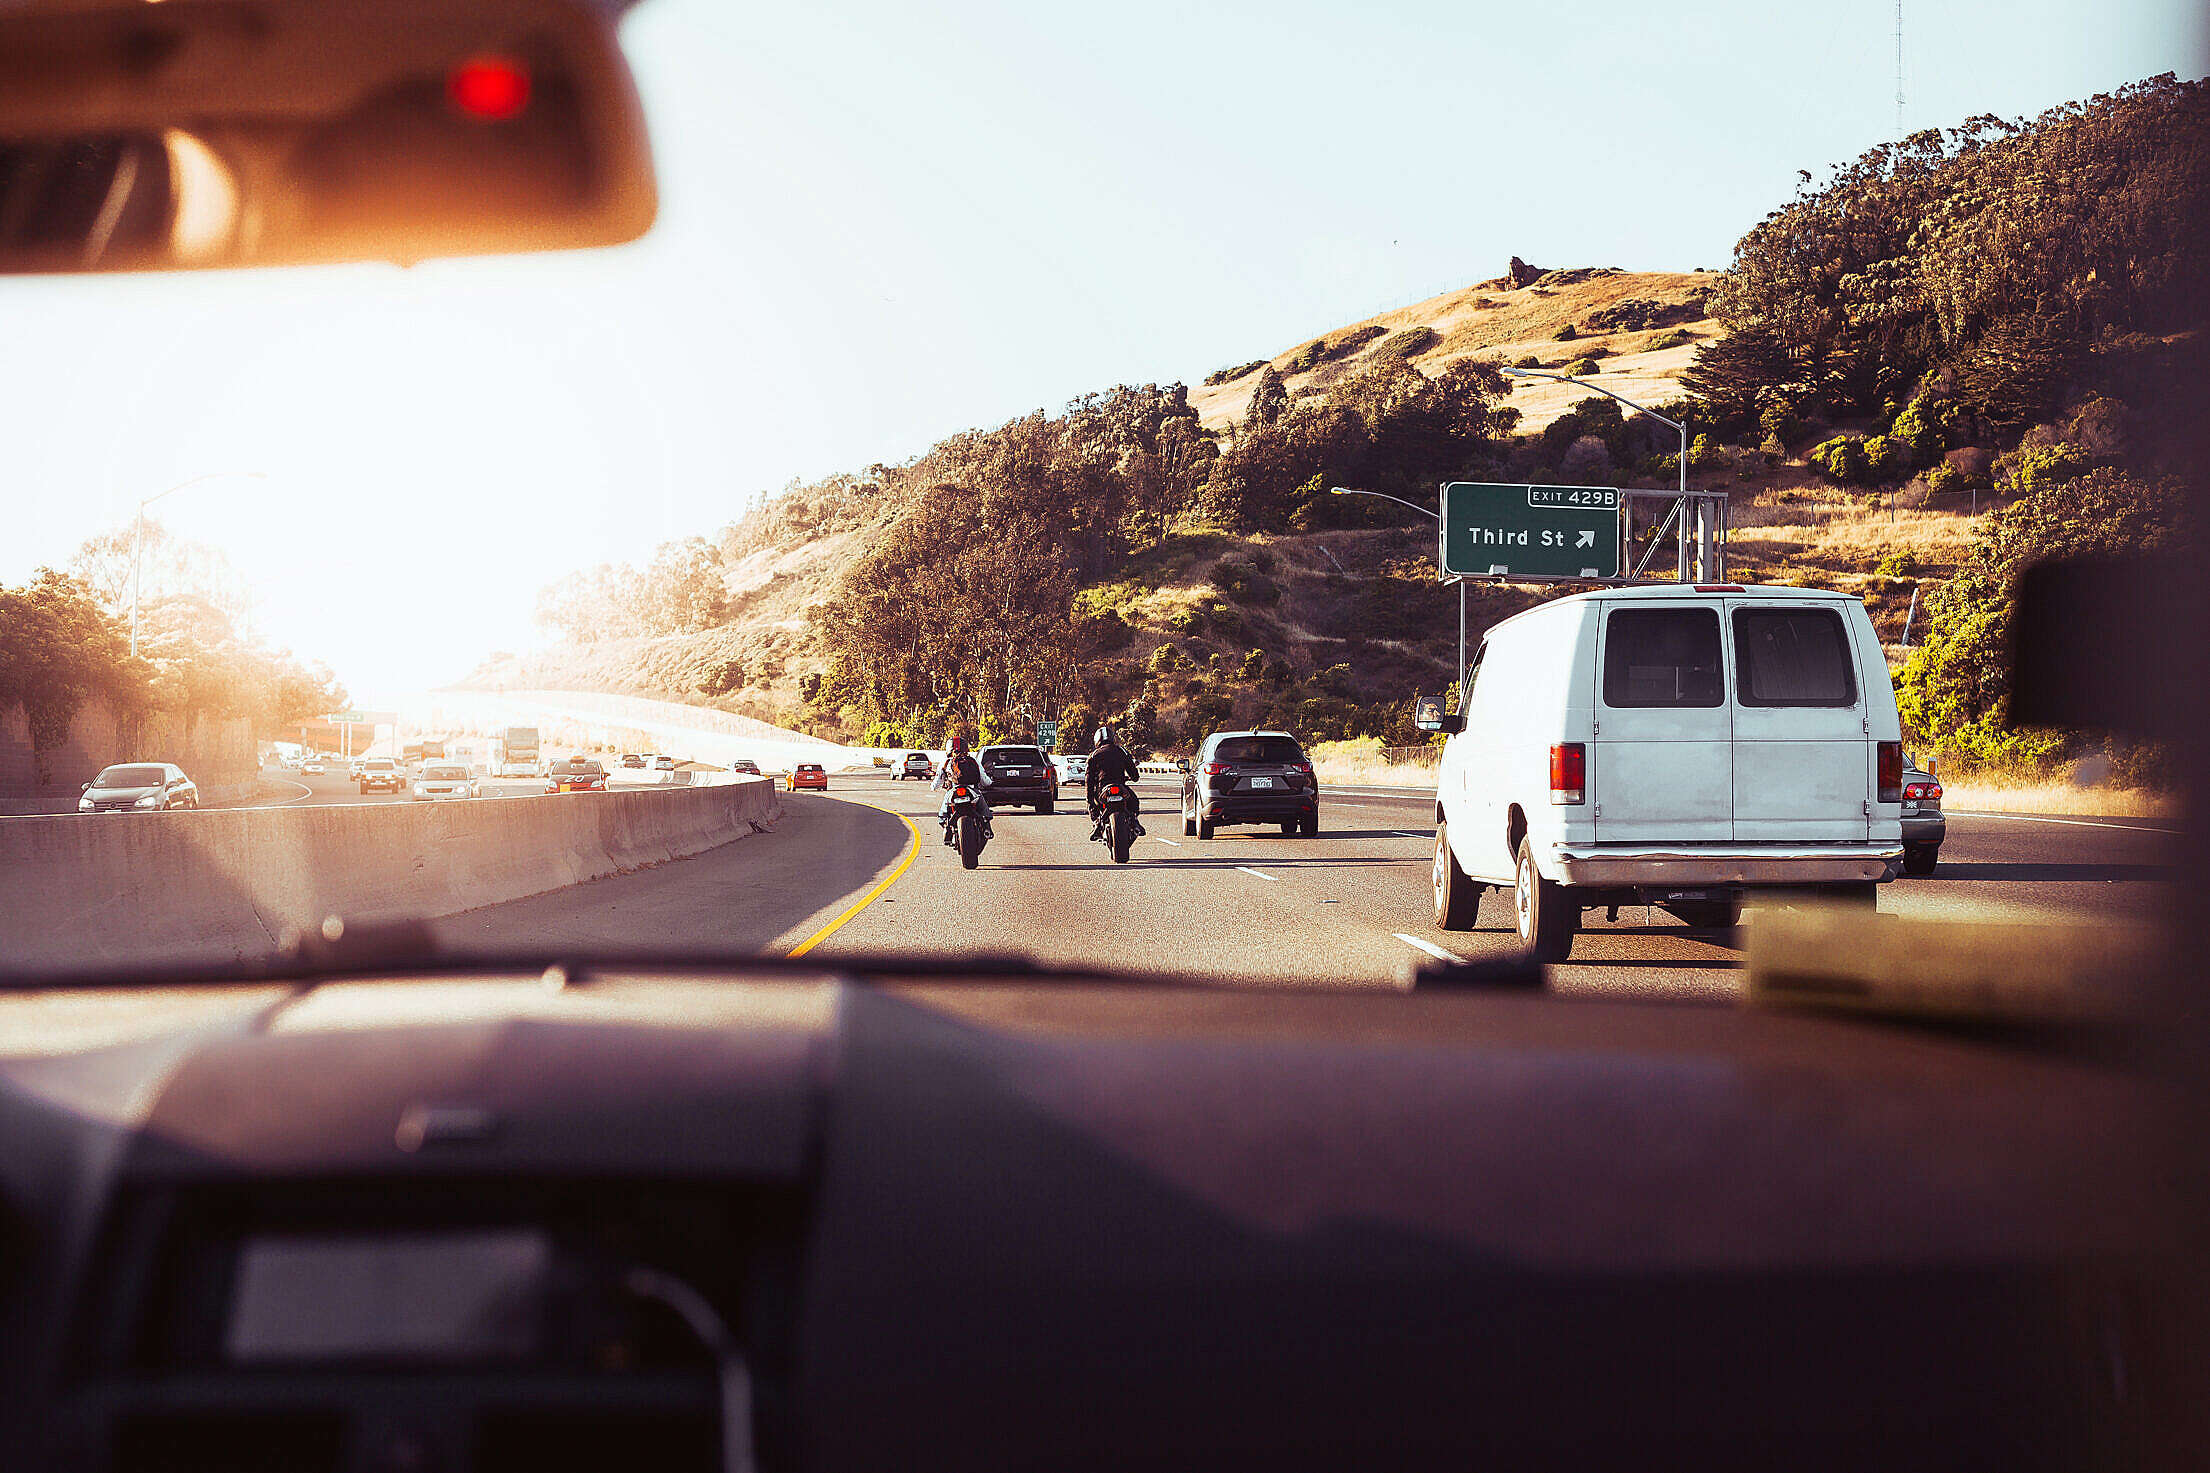 Passenger Seat View From a Car on a California Road Free Stock Photo